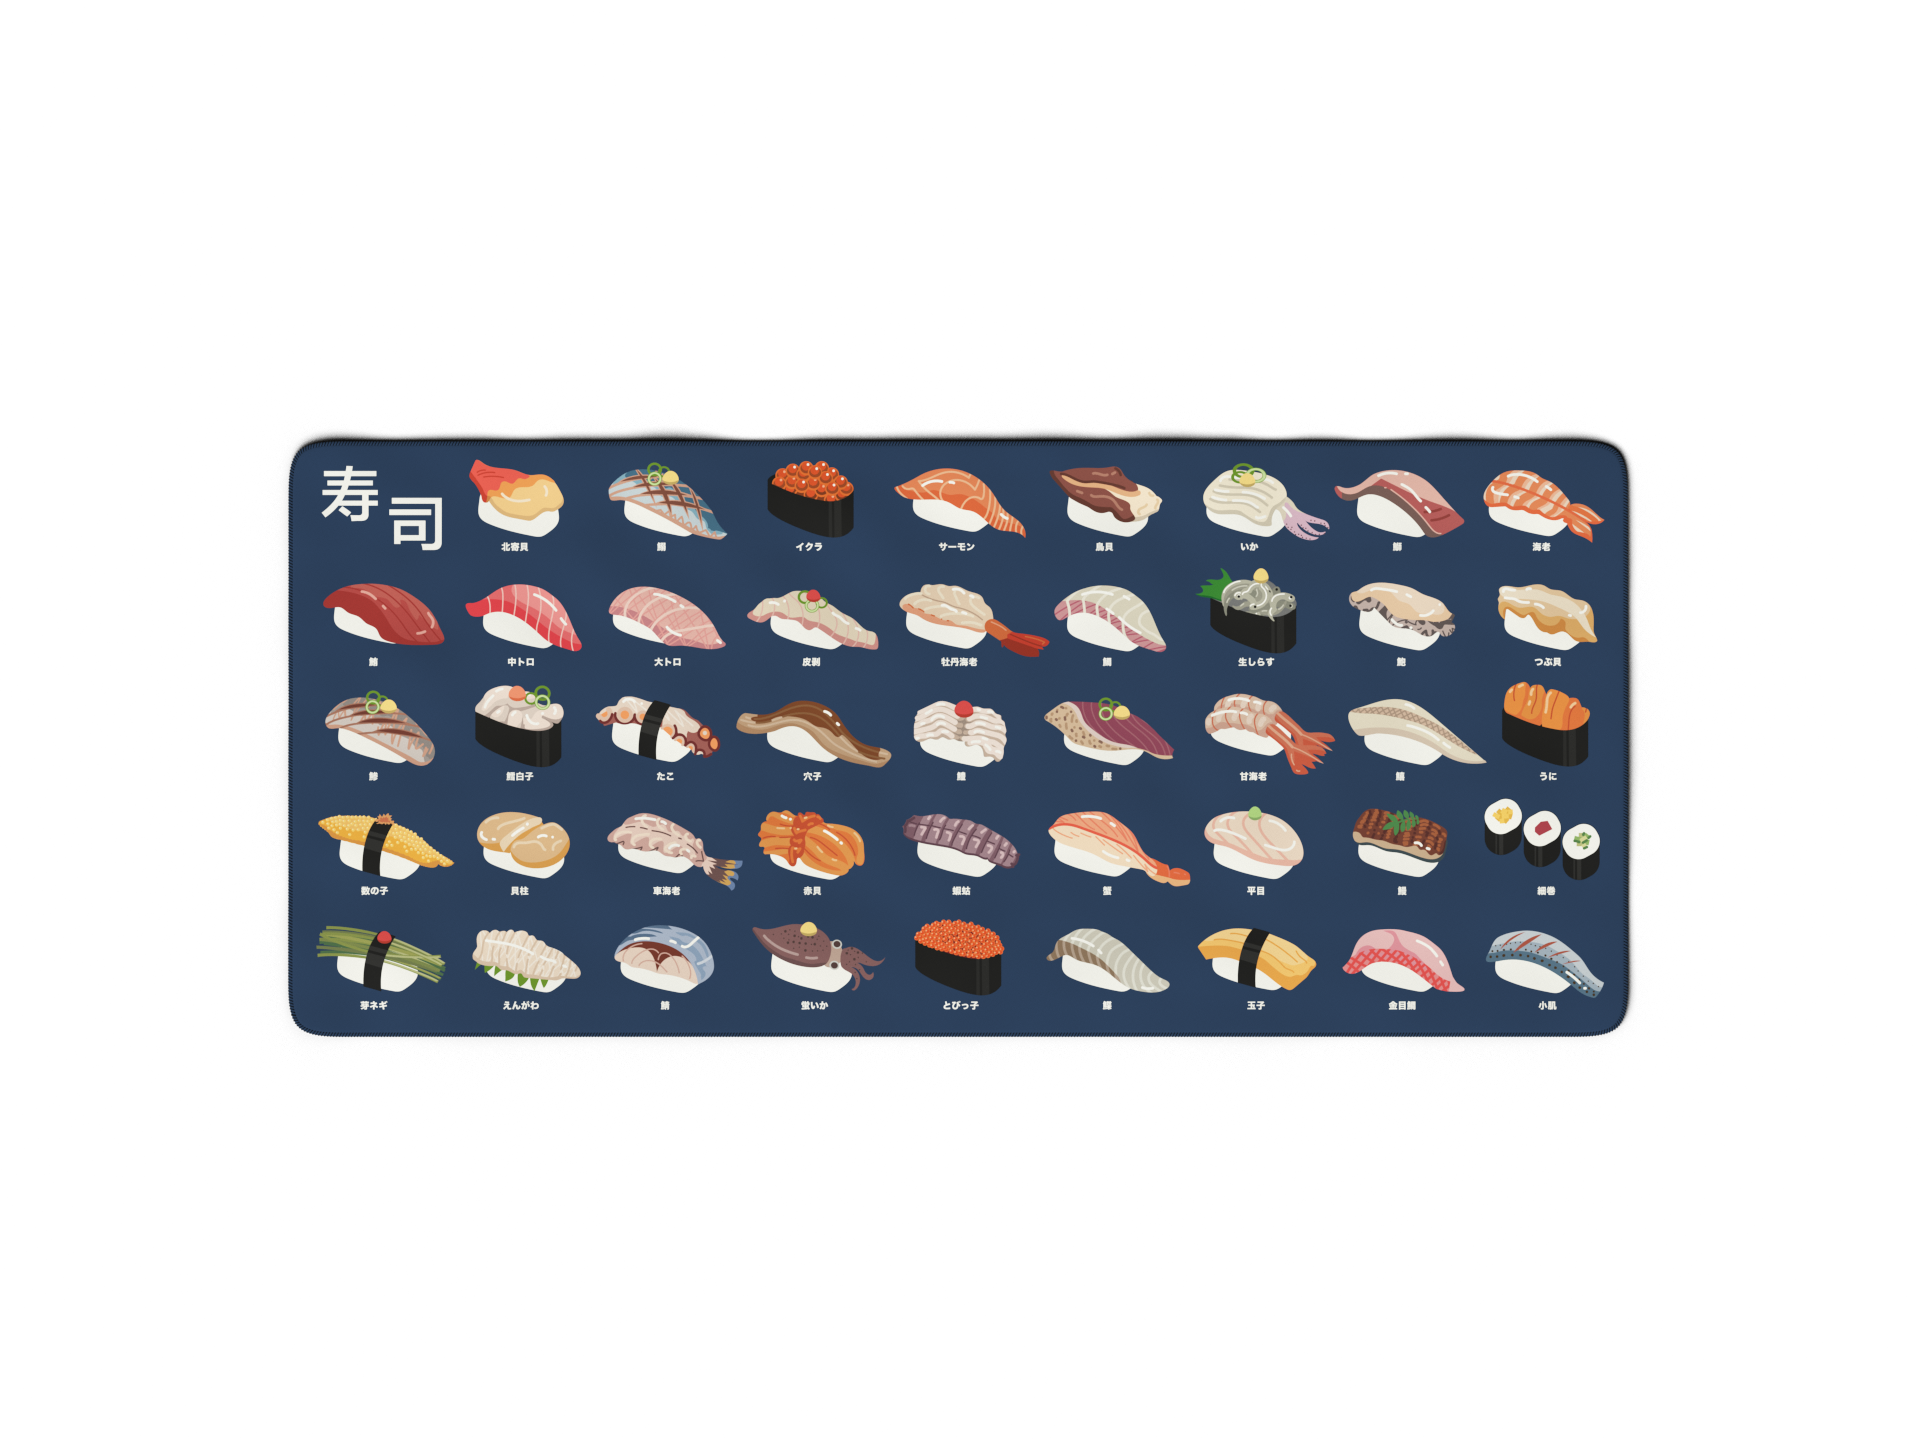 Sushi mat - 巻きす・太巻き型・細巻き型 - – the rice factory New York